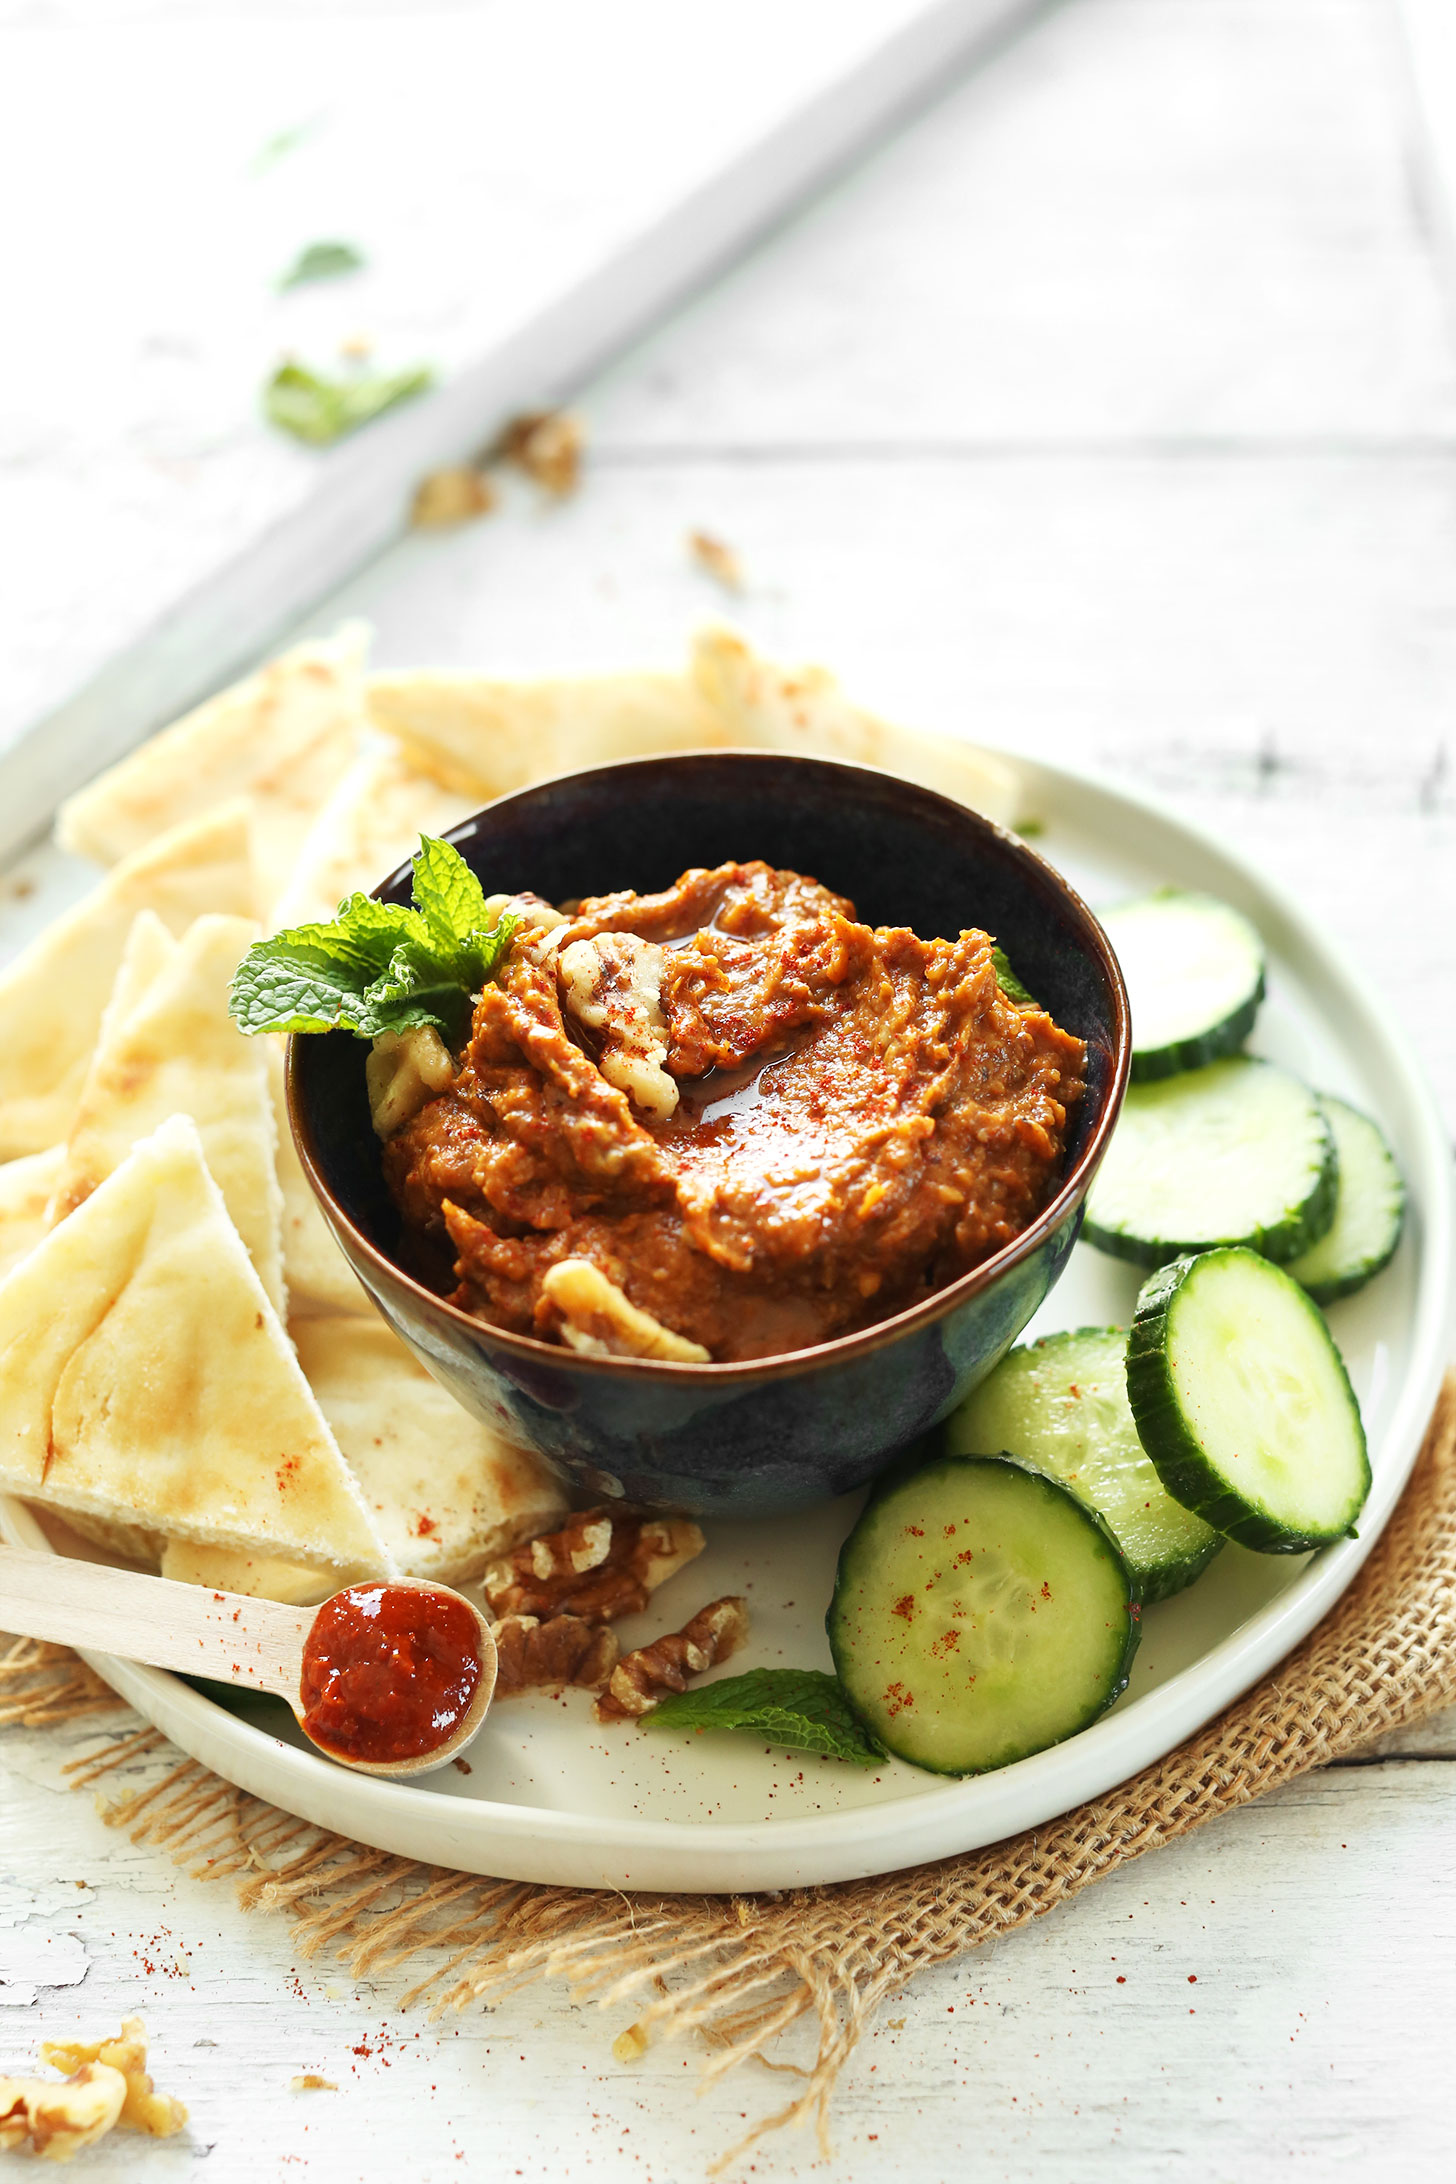 Bowl of our Smoky Harissa Eggplant Dip with cucumbers and pita bread for dipping